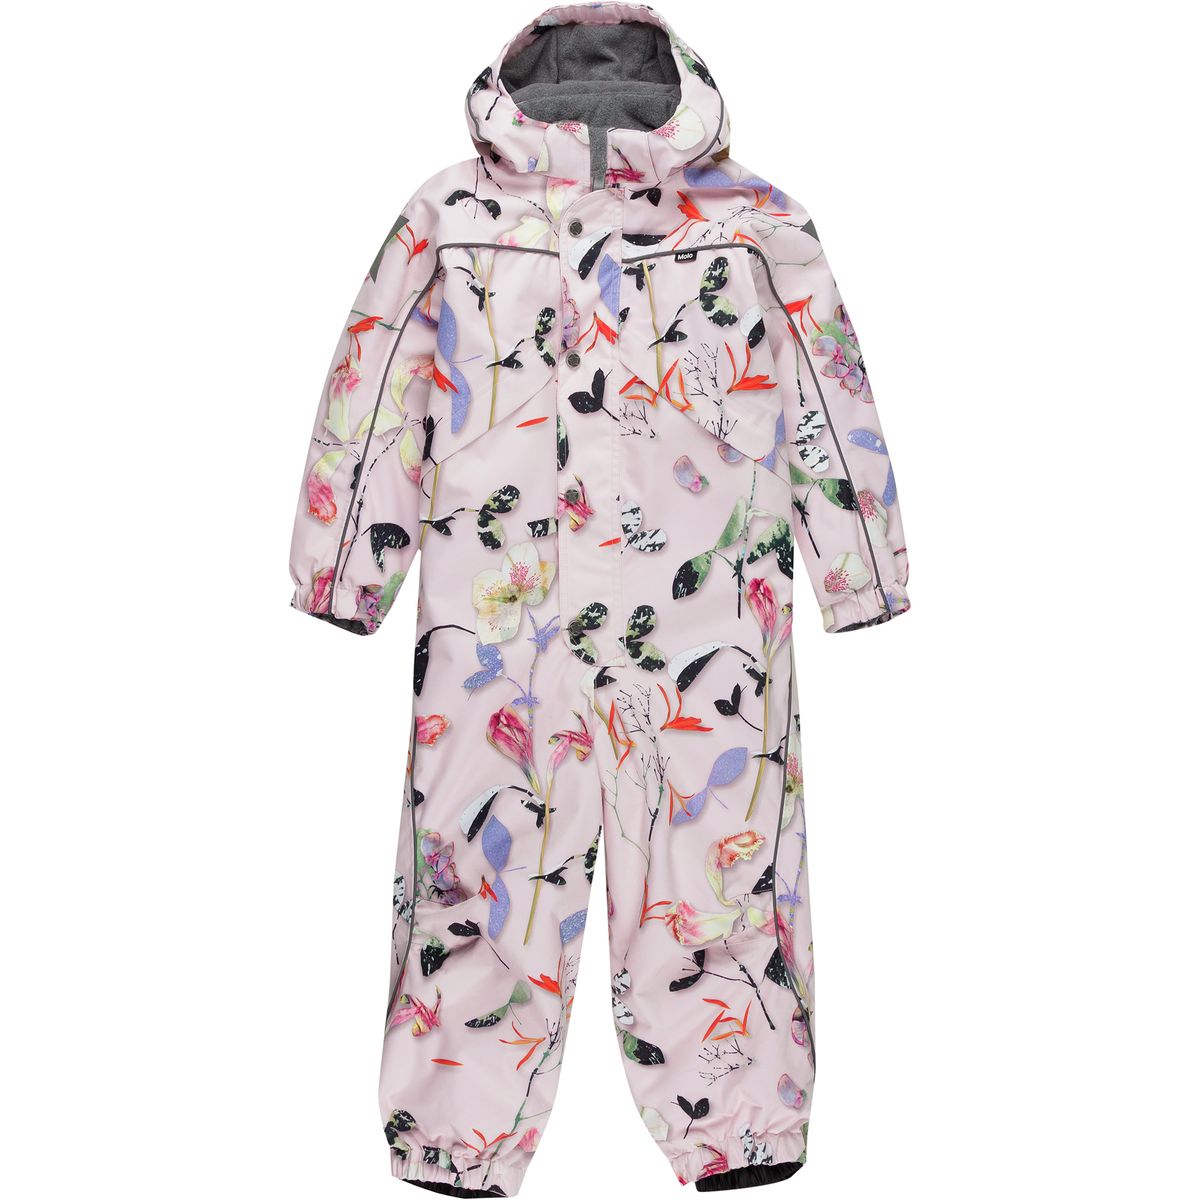 Toddler Snow Suits